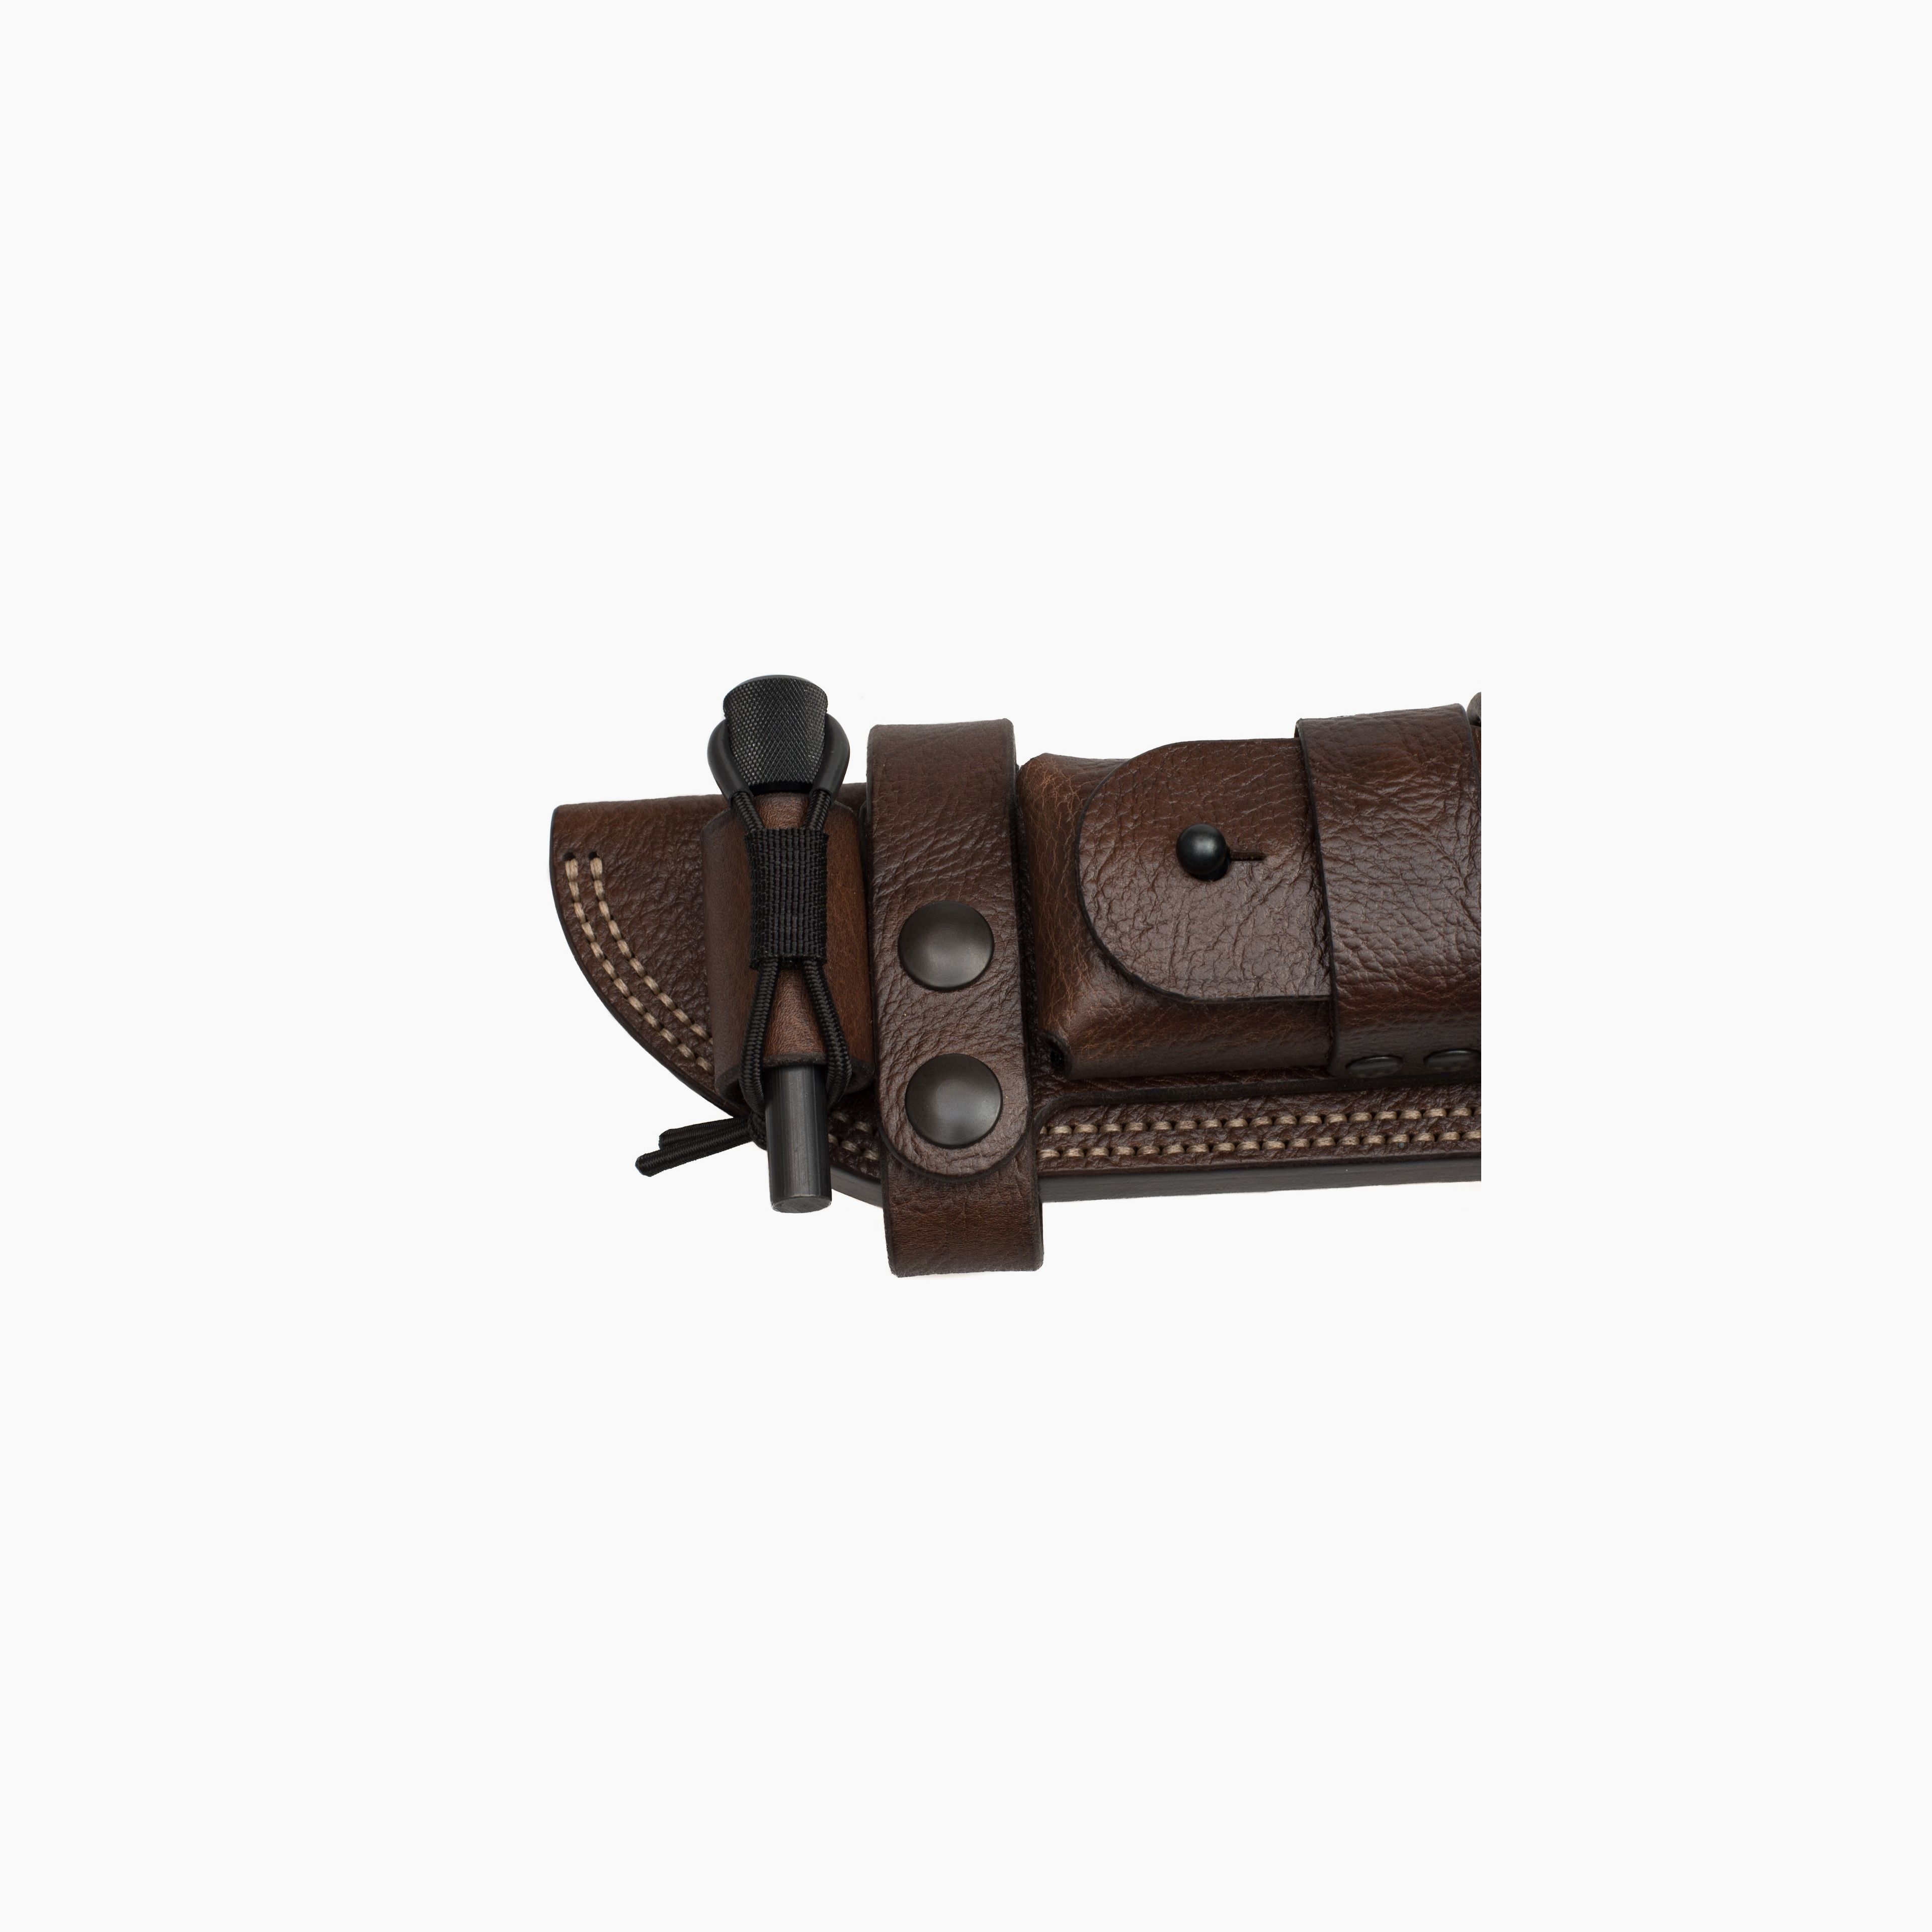 Sheath For The ESEE-6 Knife